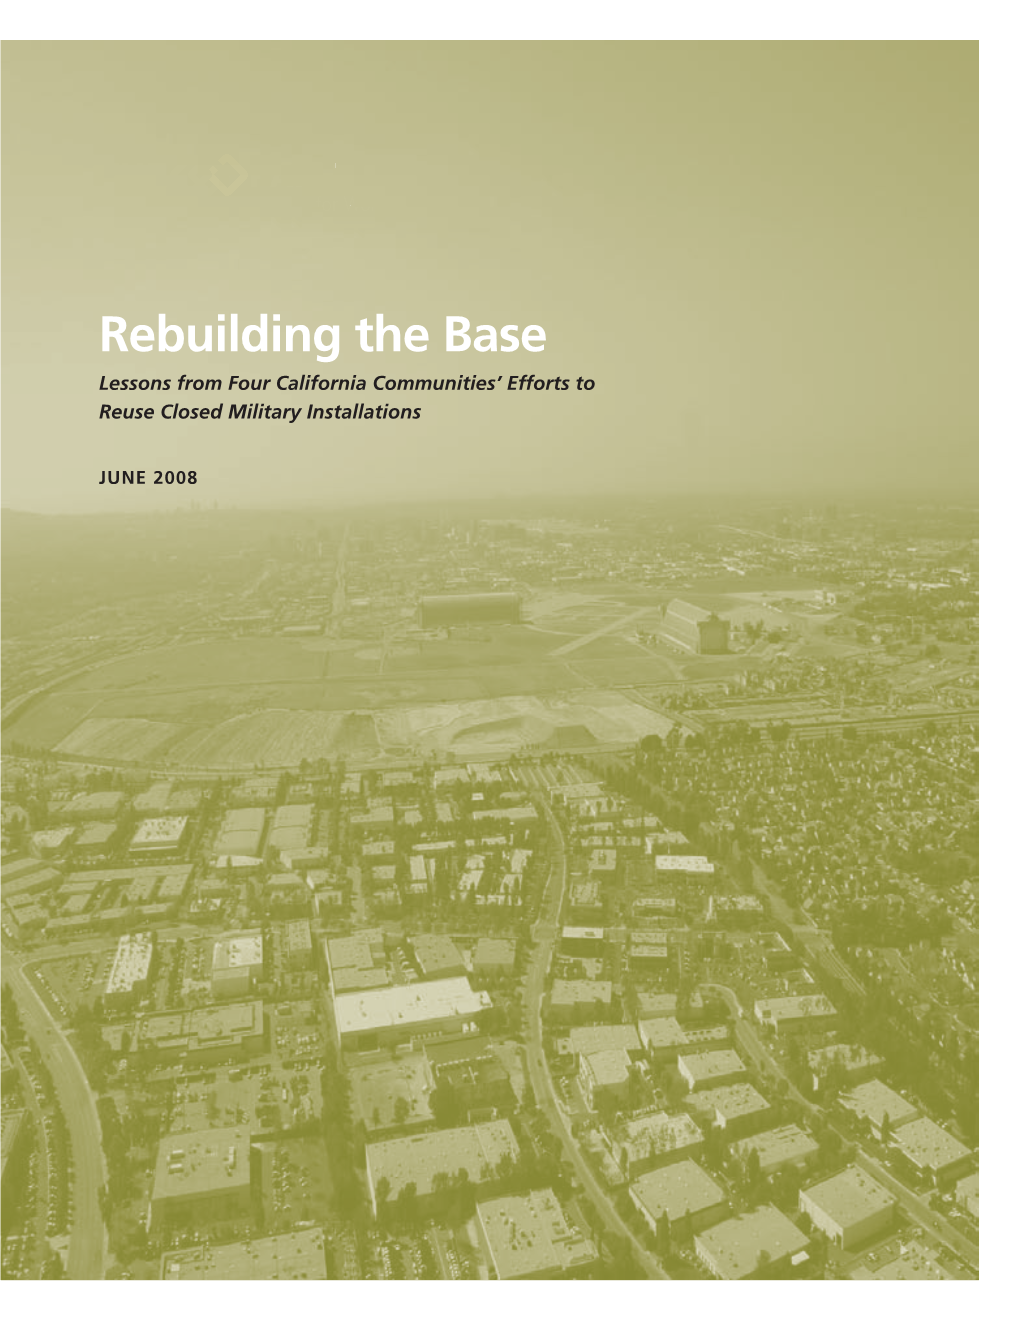 Rebuilding the Base Lessons from Four California Communities’ Efforts to Reuse Closed Military Installations